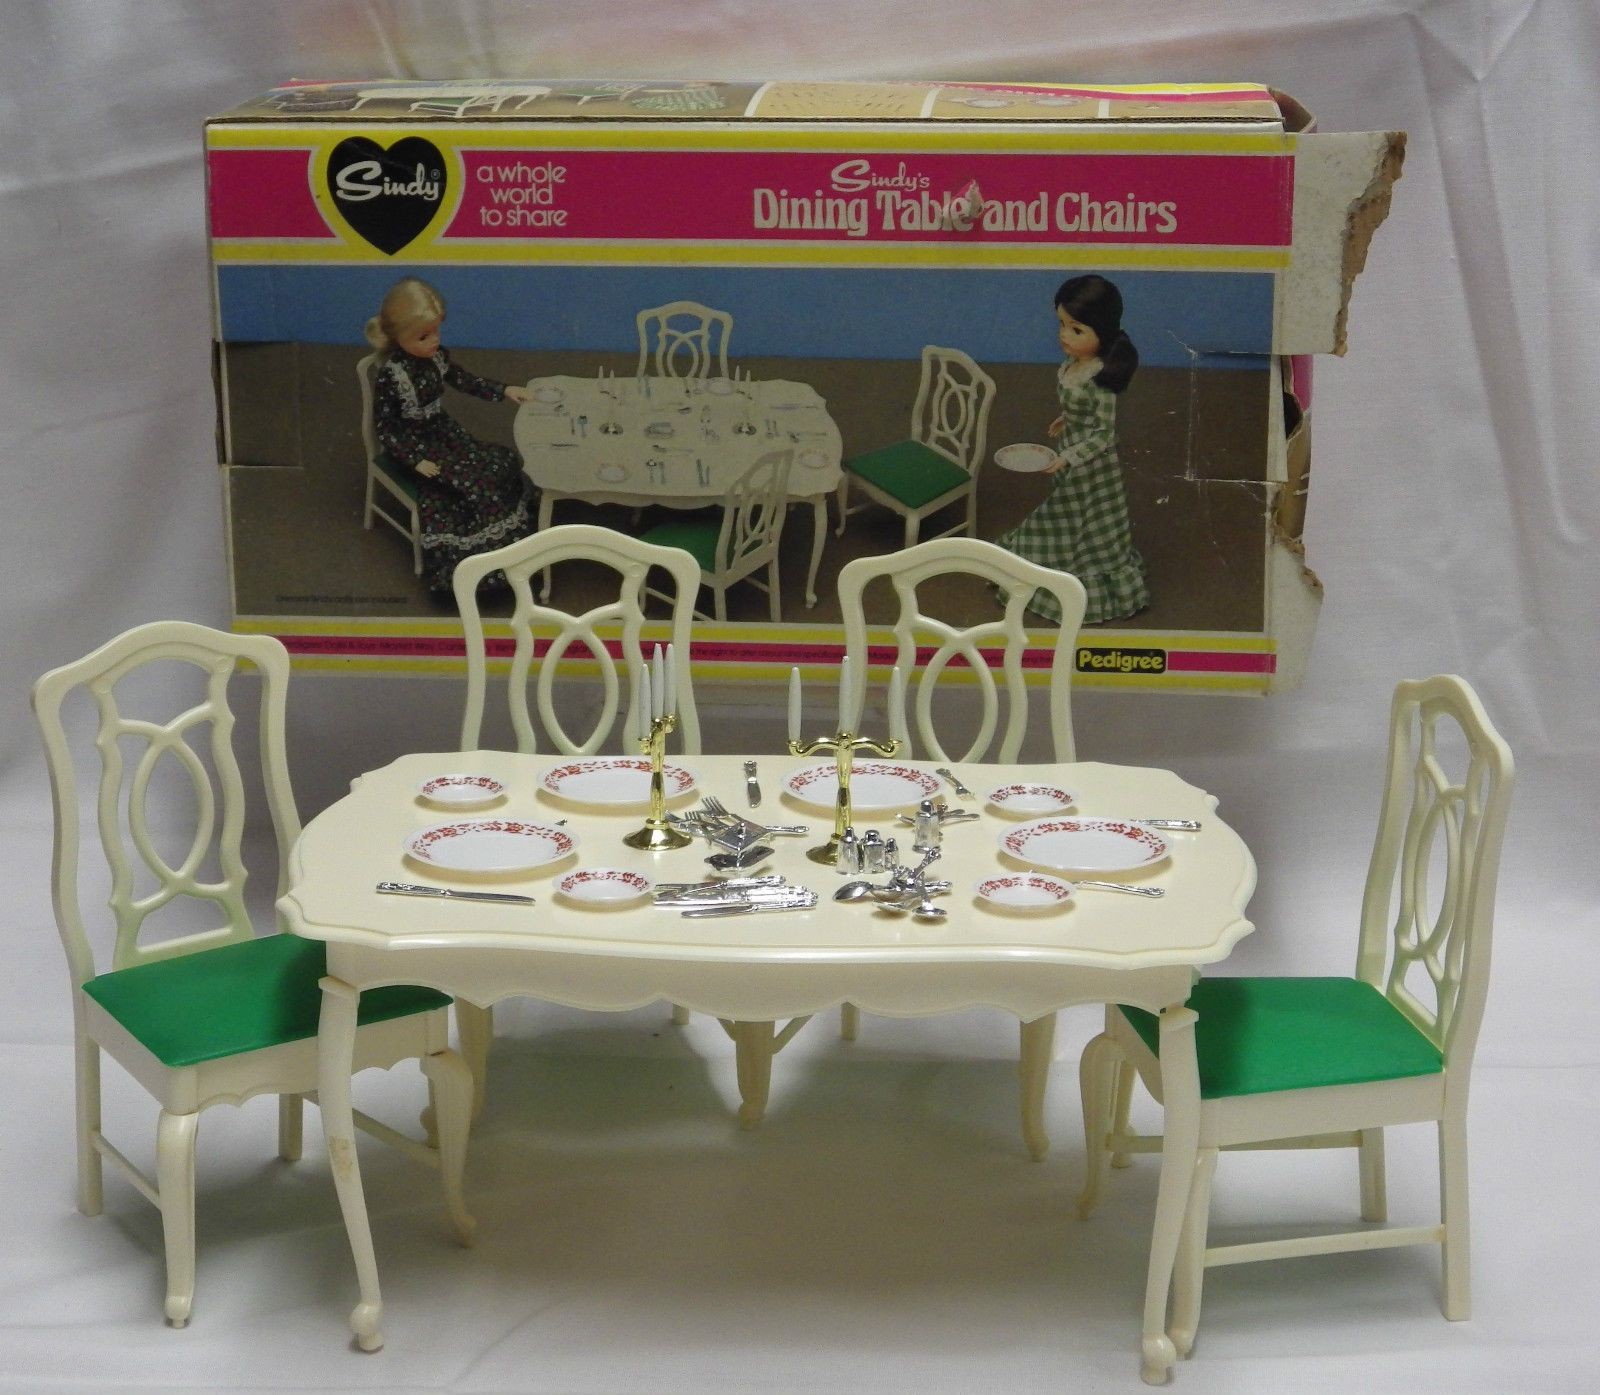 Furniture Papercraft Vintage 60s 70s Sindy Dining Table and Chairs W Accessories Boxed